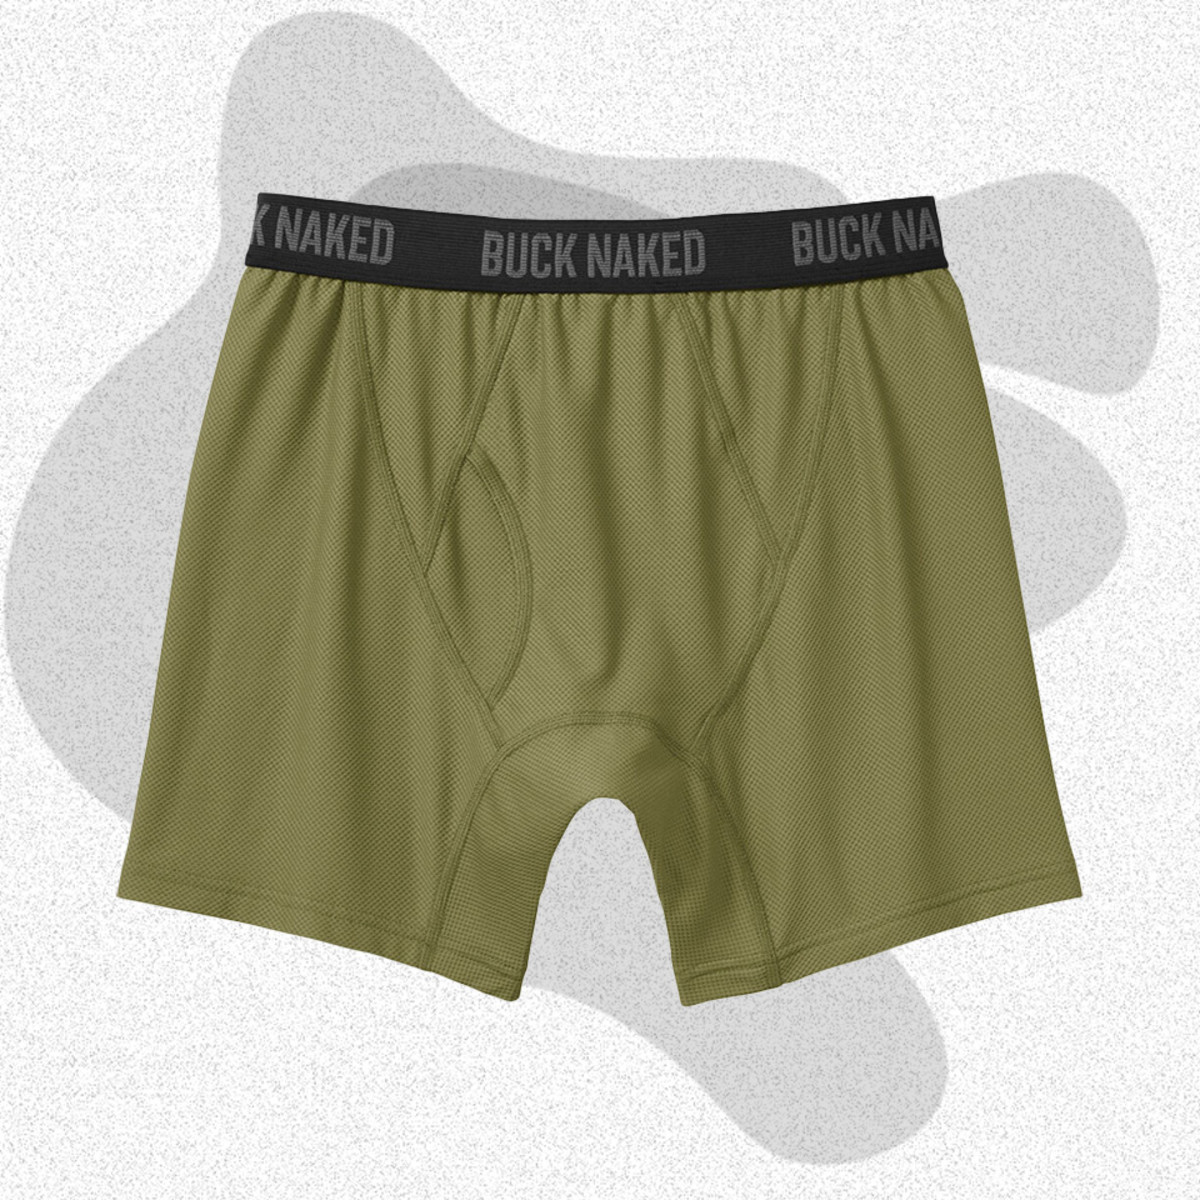 This Is The Best Underwear To Workout In - Men's Health